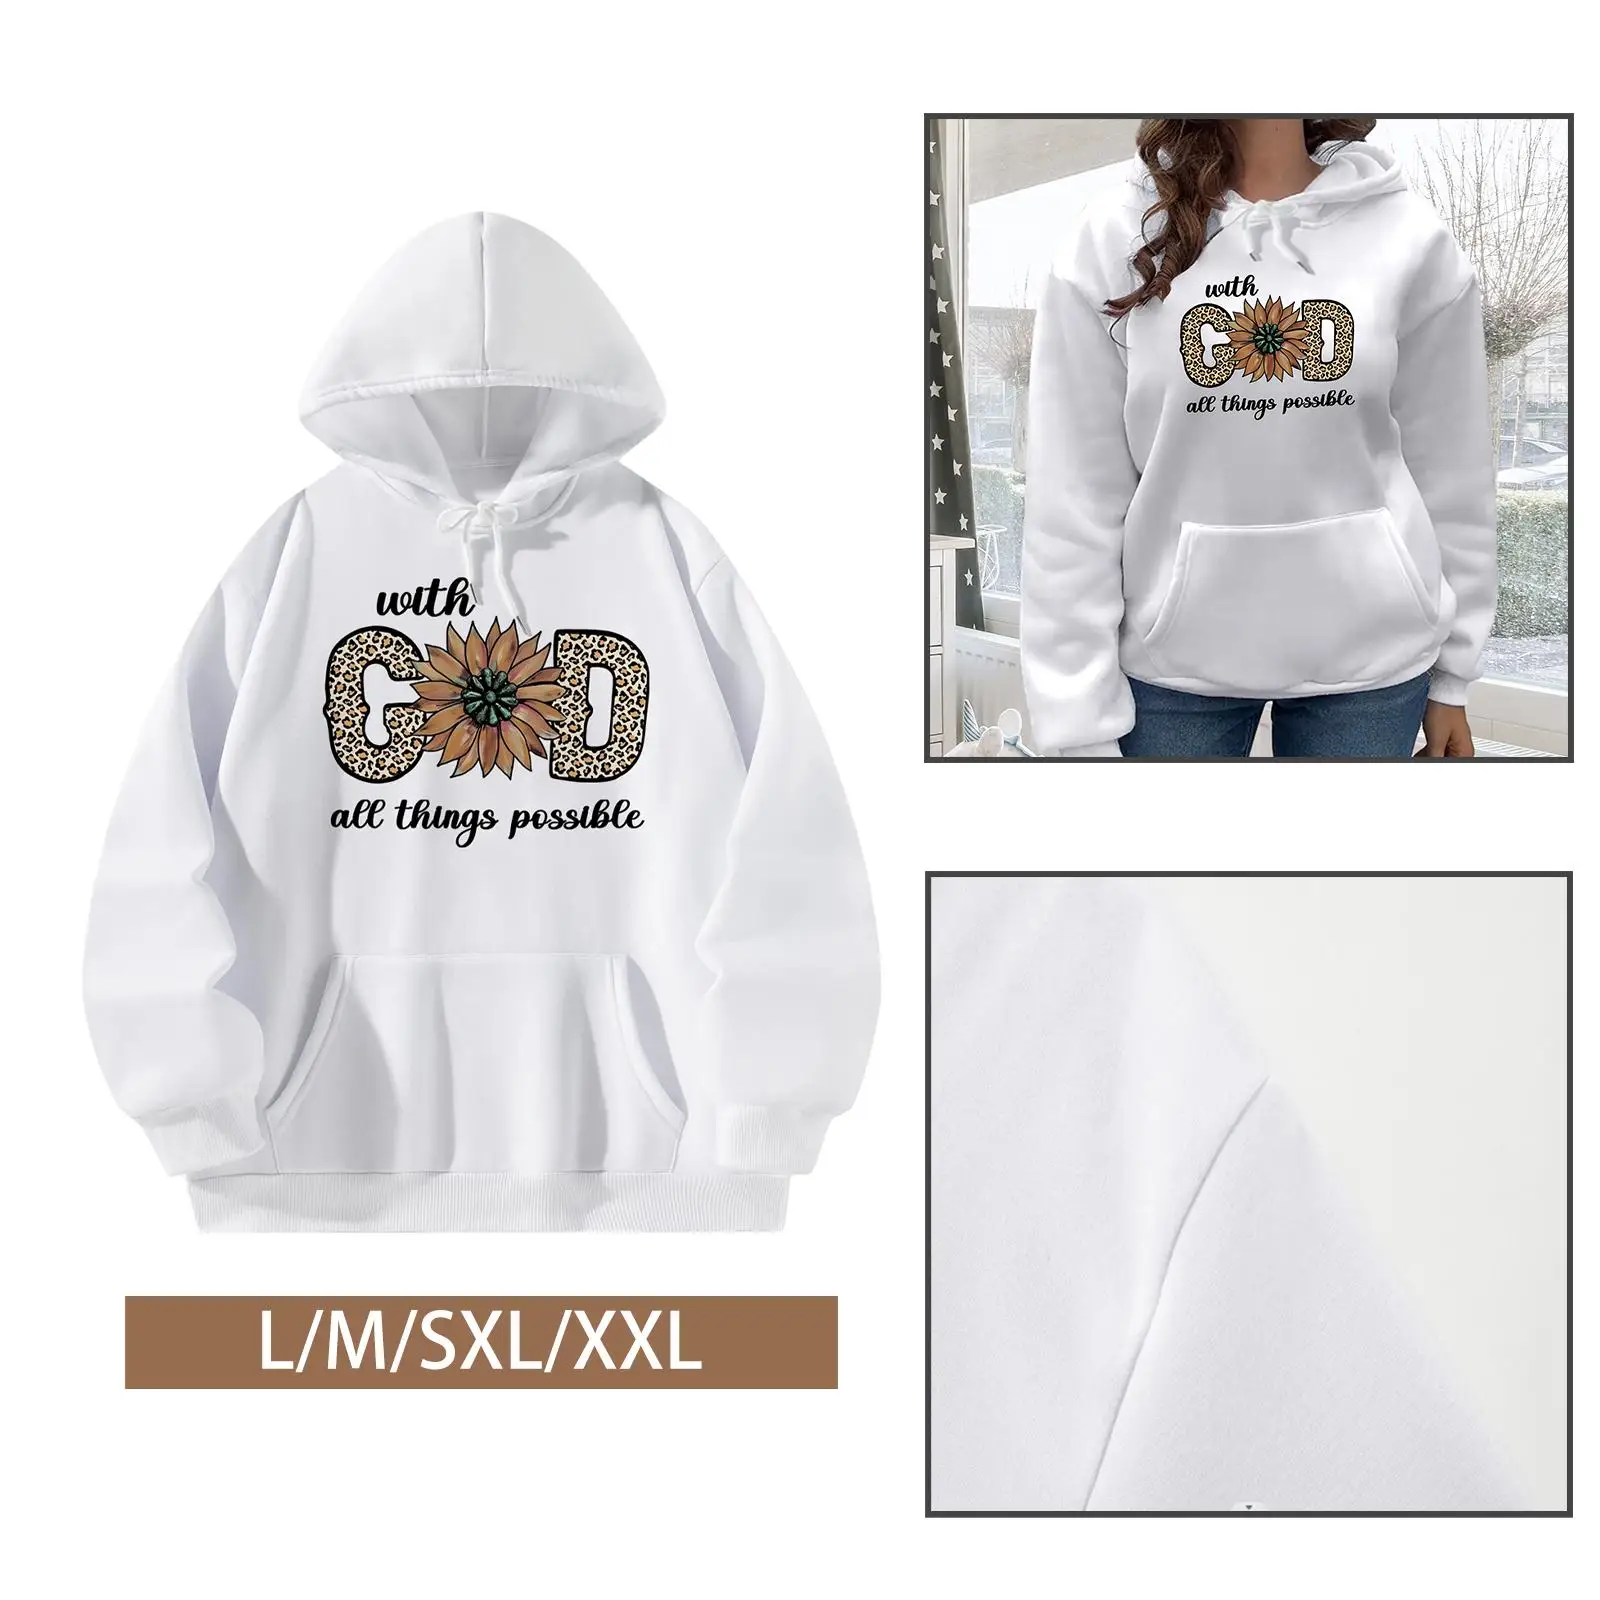 Drawstring Hoodie Stylish White Long Sleeve Soft Causal Adult Hoodie Pullover Tops for Street Shopping Camping Office Climbing